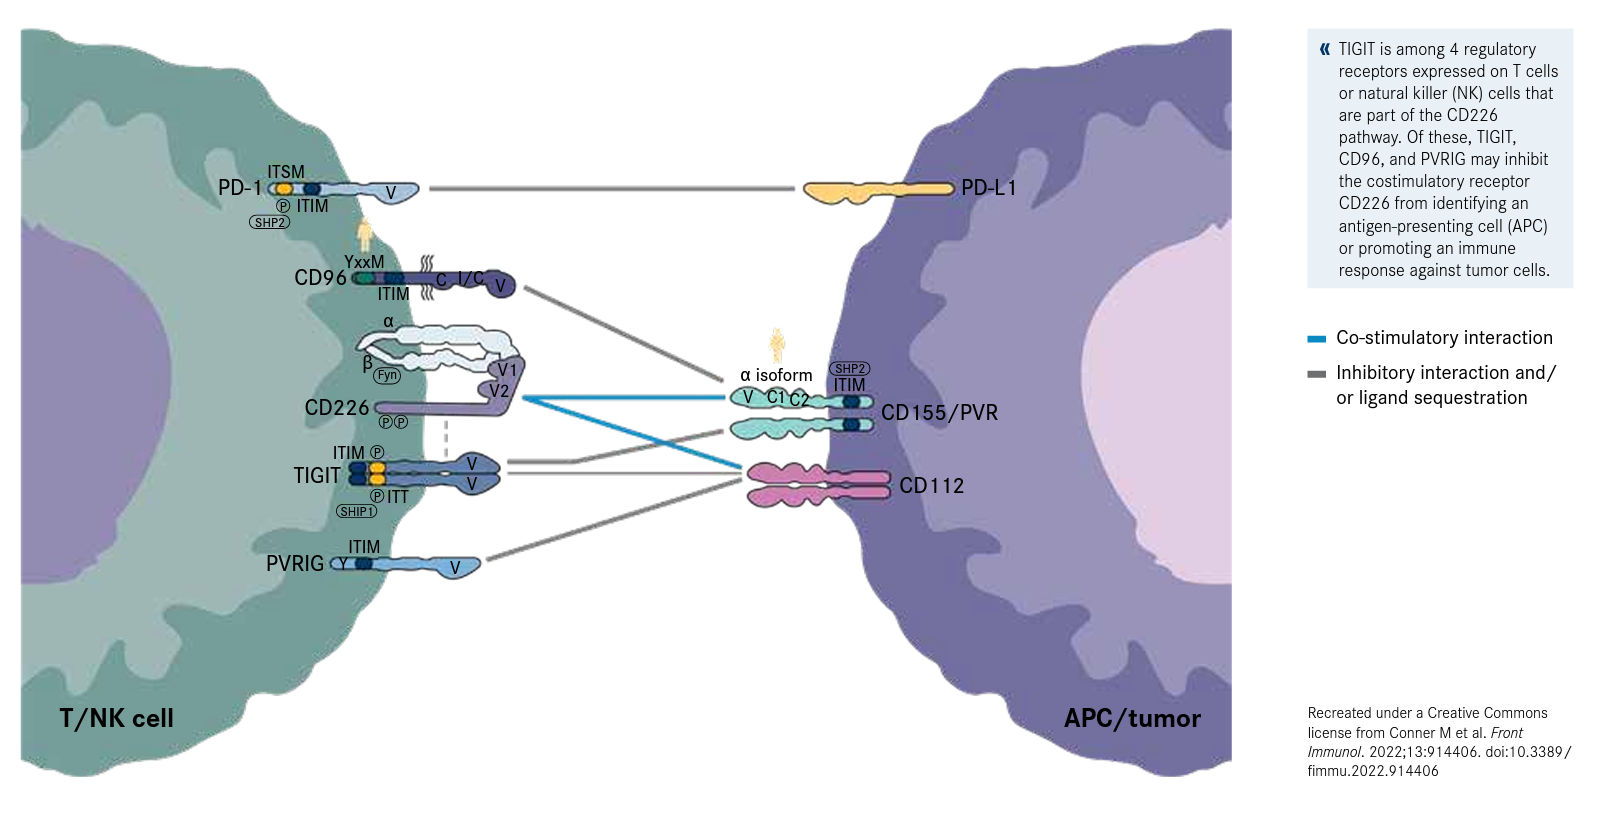 Figure 1. TIGIT in the Context of the CD226 Axis8